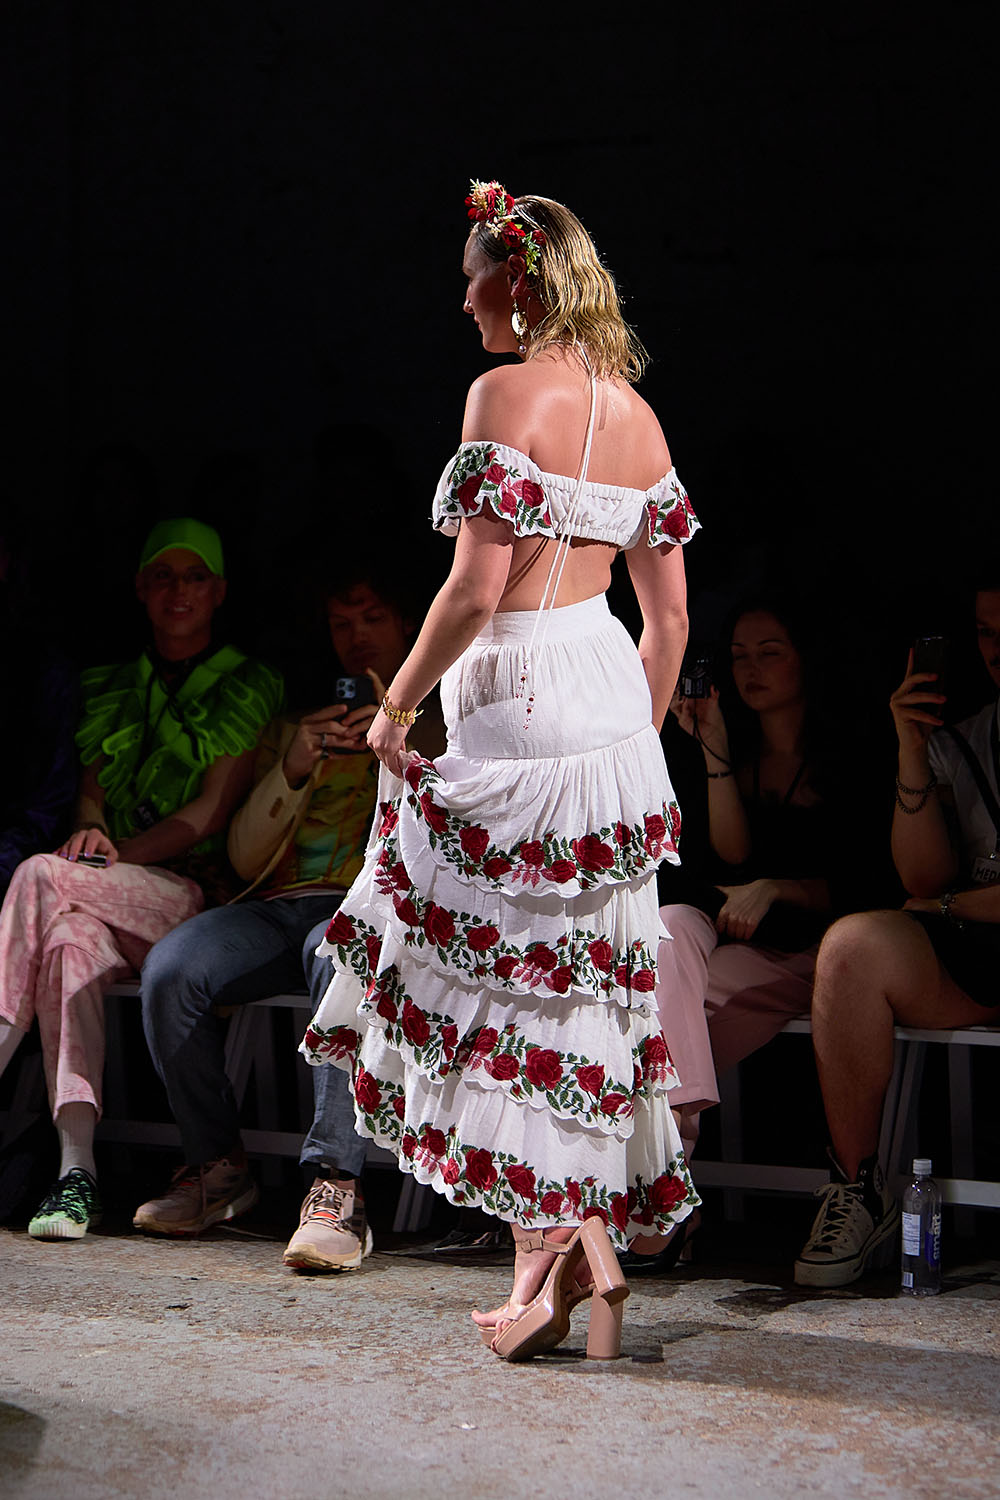 Rose Layered Skirt with A Bustier